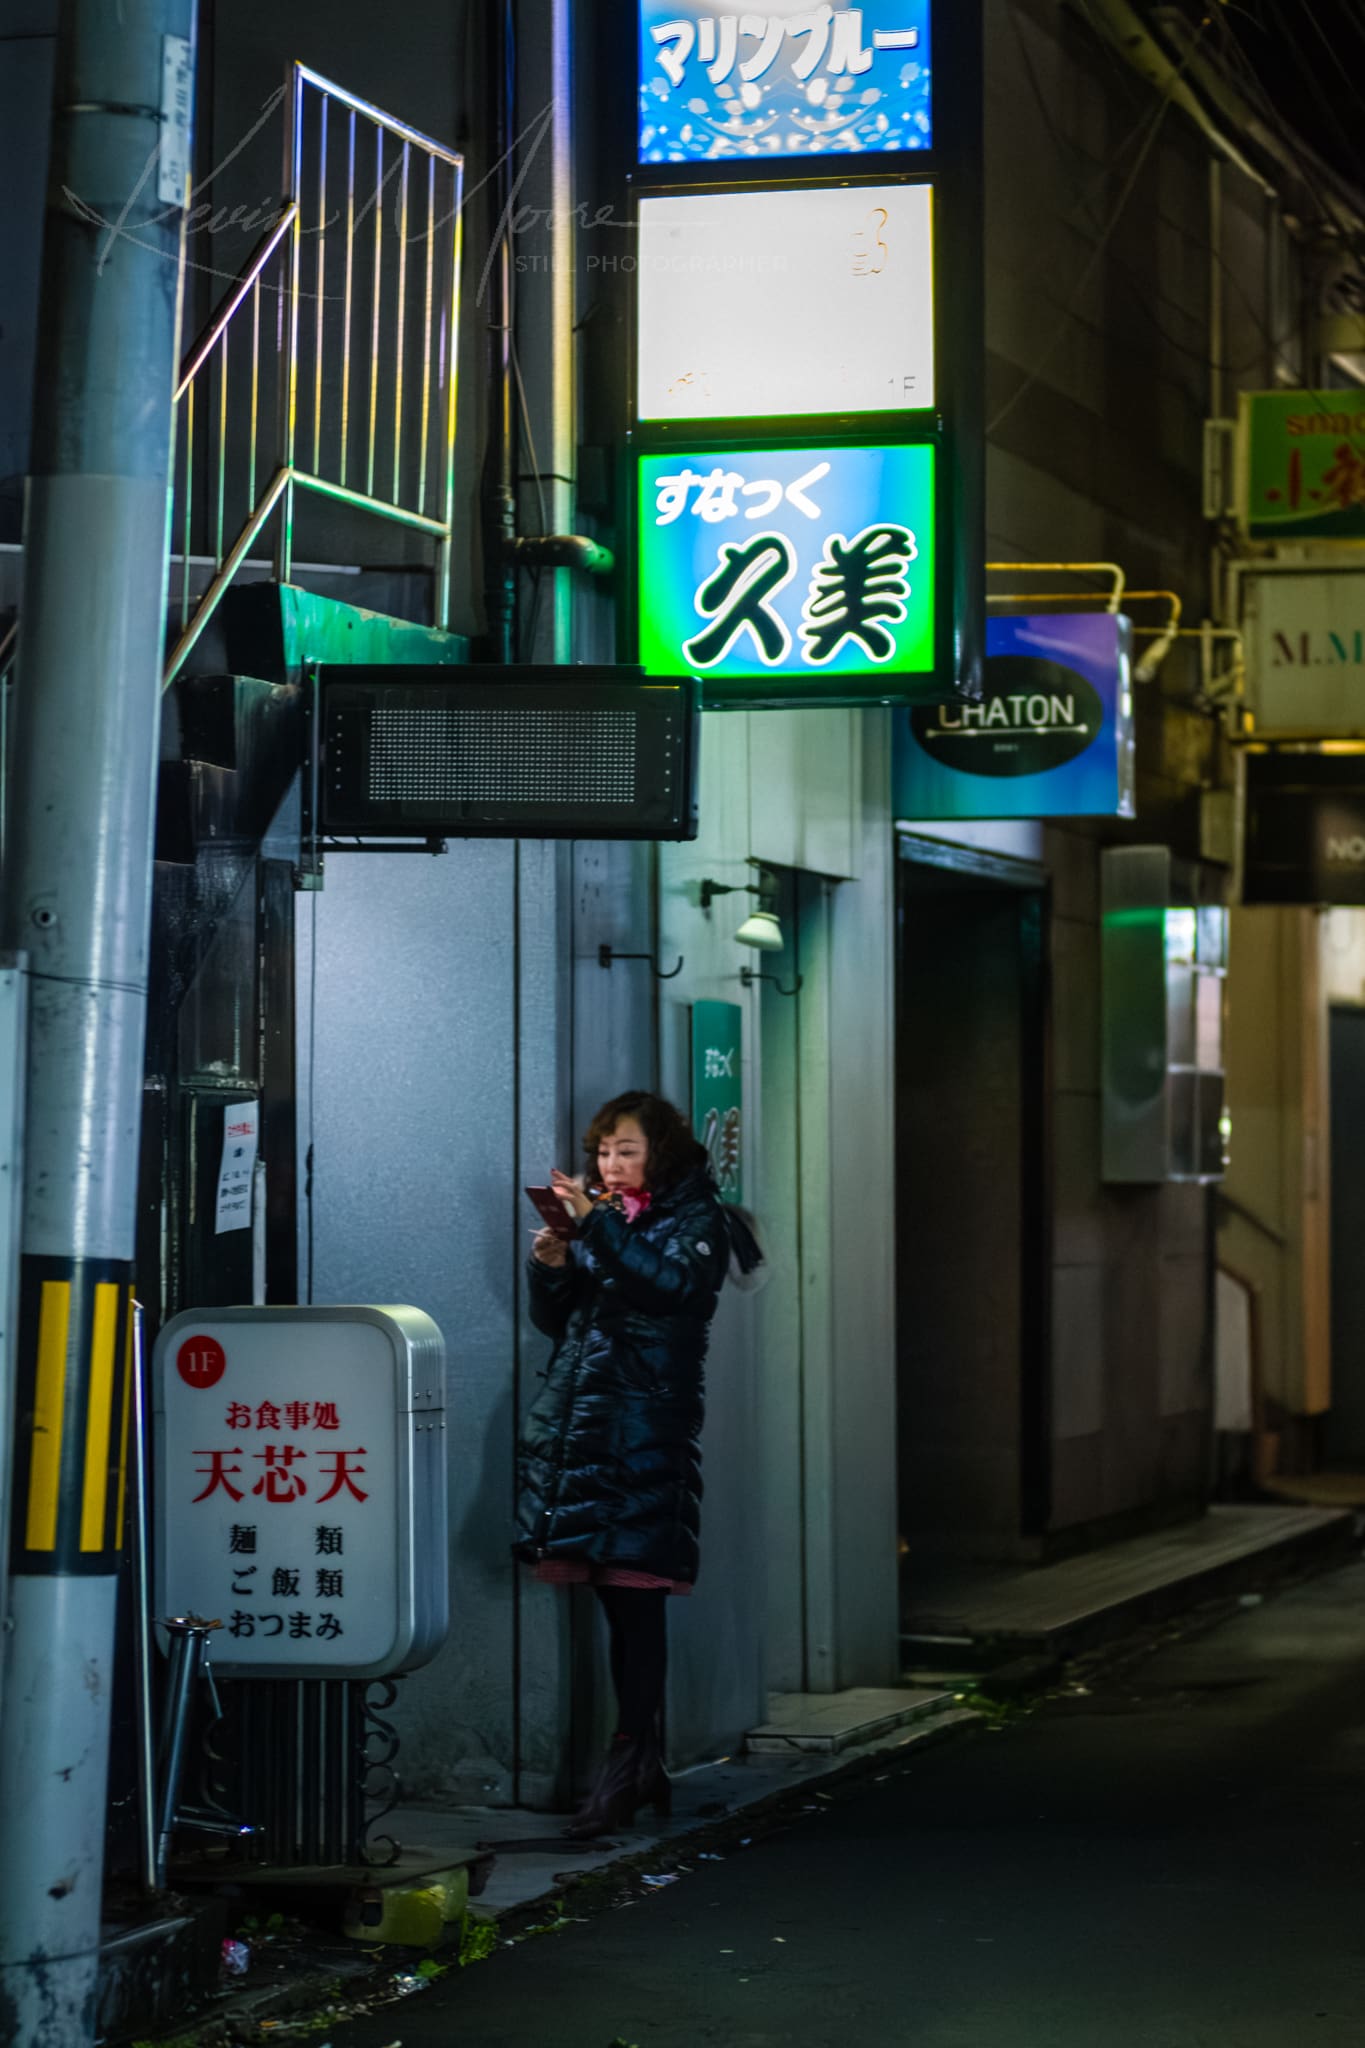 Woman using smartphone on rainy night in Japanese cityscape lit by neon signs.